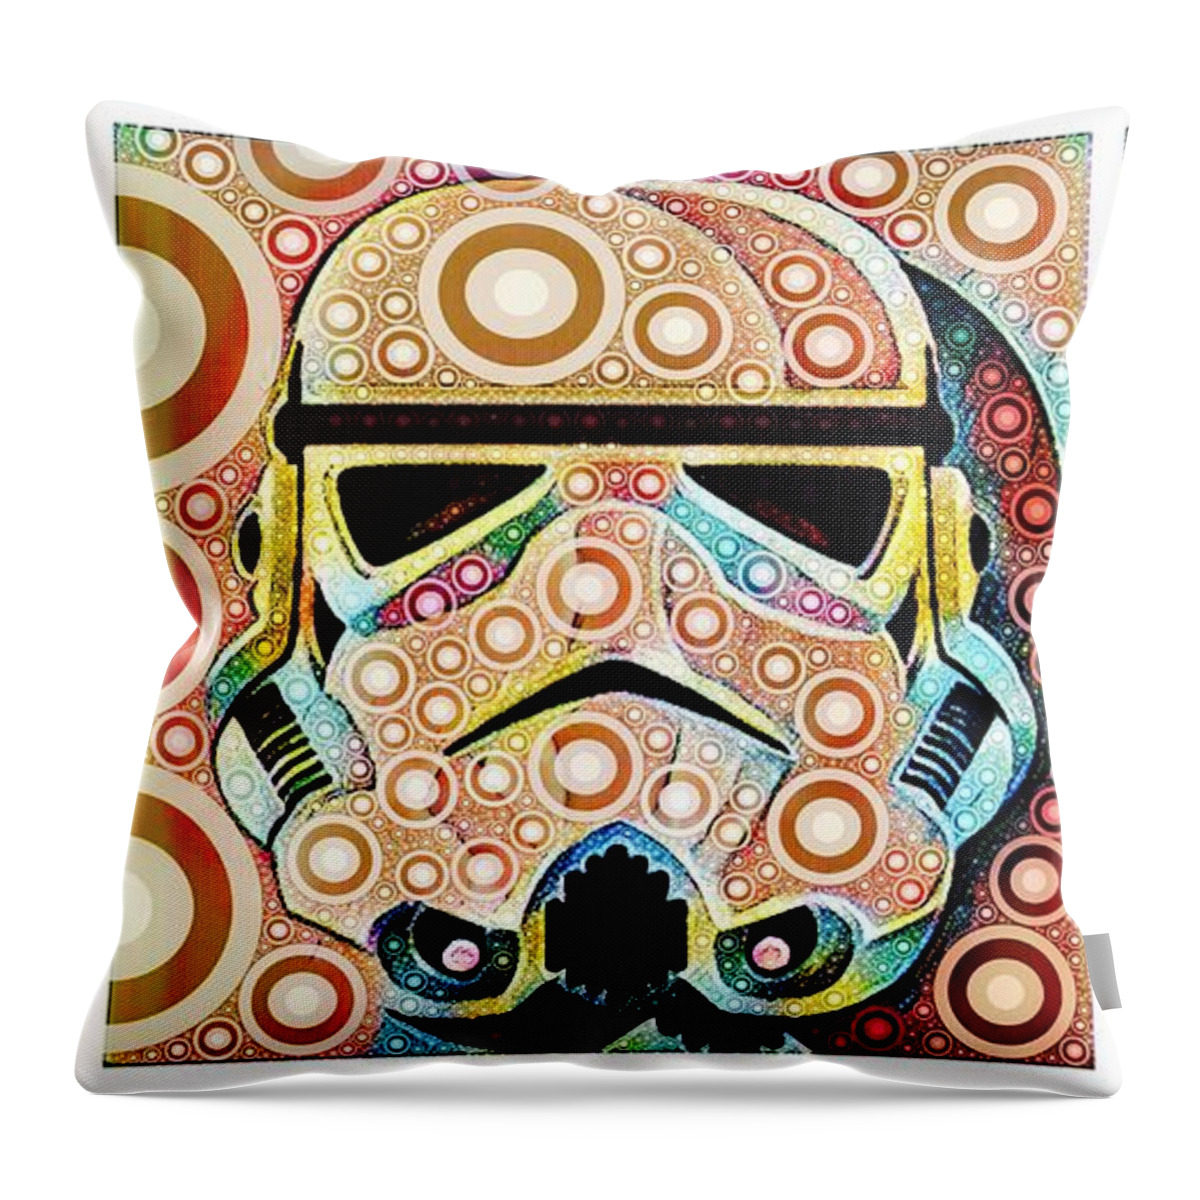 Psychedelic Throw Pillow featuring the digital art Psychedelic Binom by HELGE Art Gallery